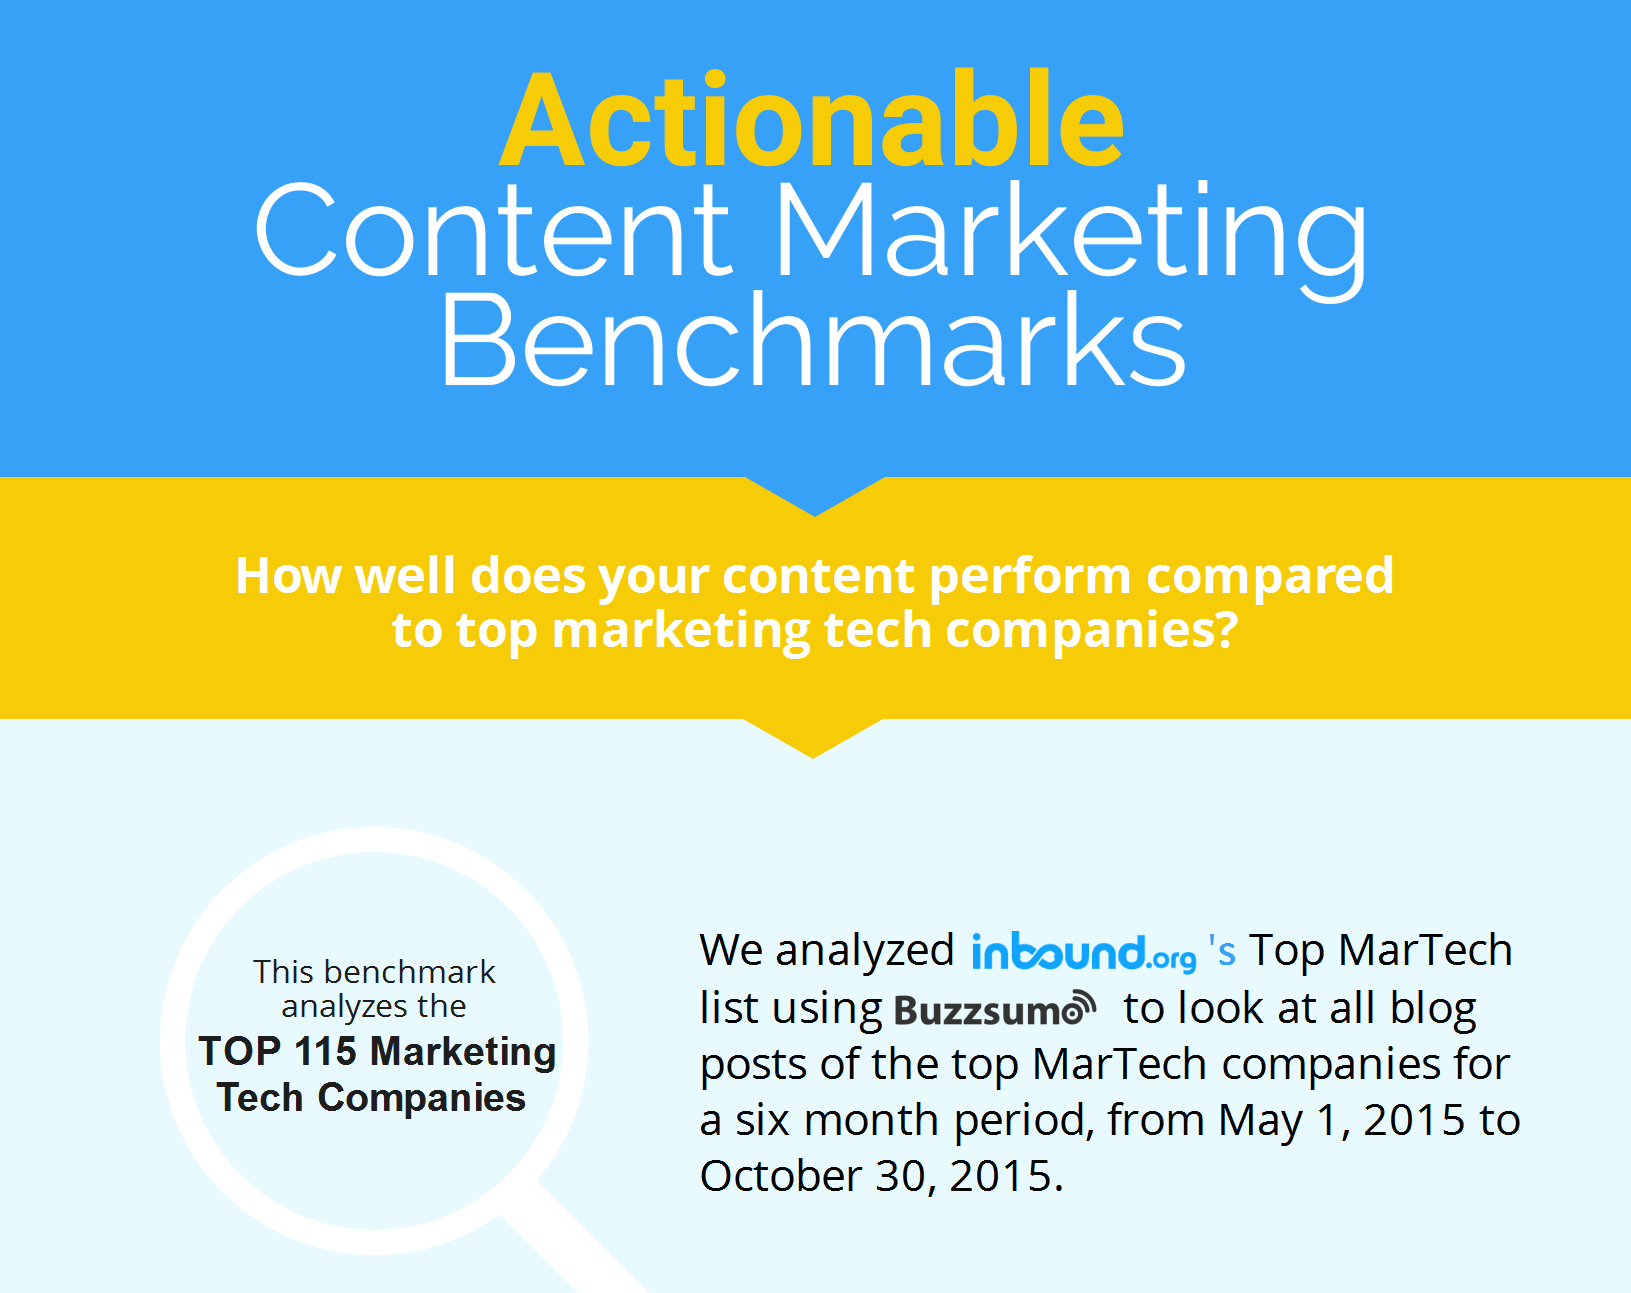 Actionable content marketing benchmarks